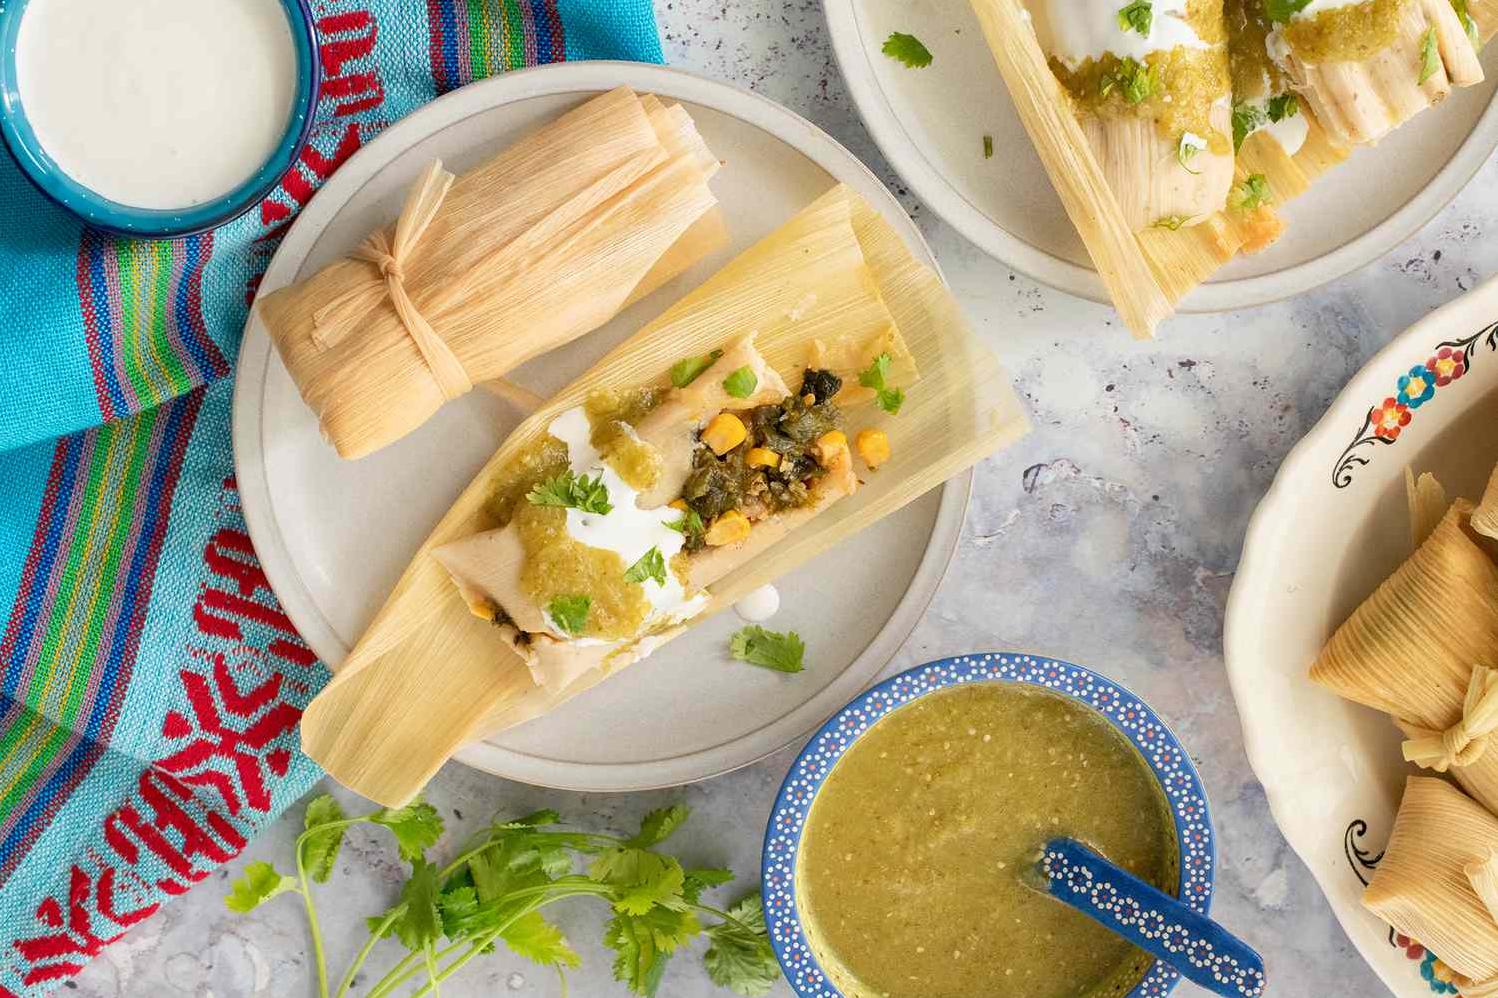  Forget ordinary dinner - embrace the spicy flavors with our Tamales